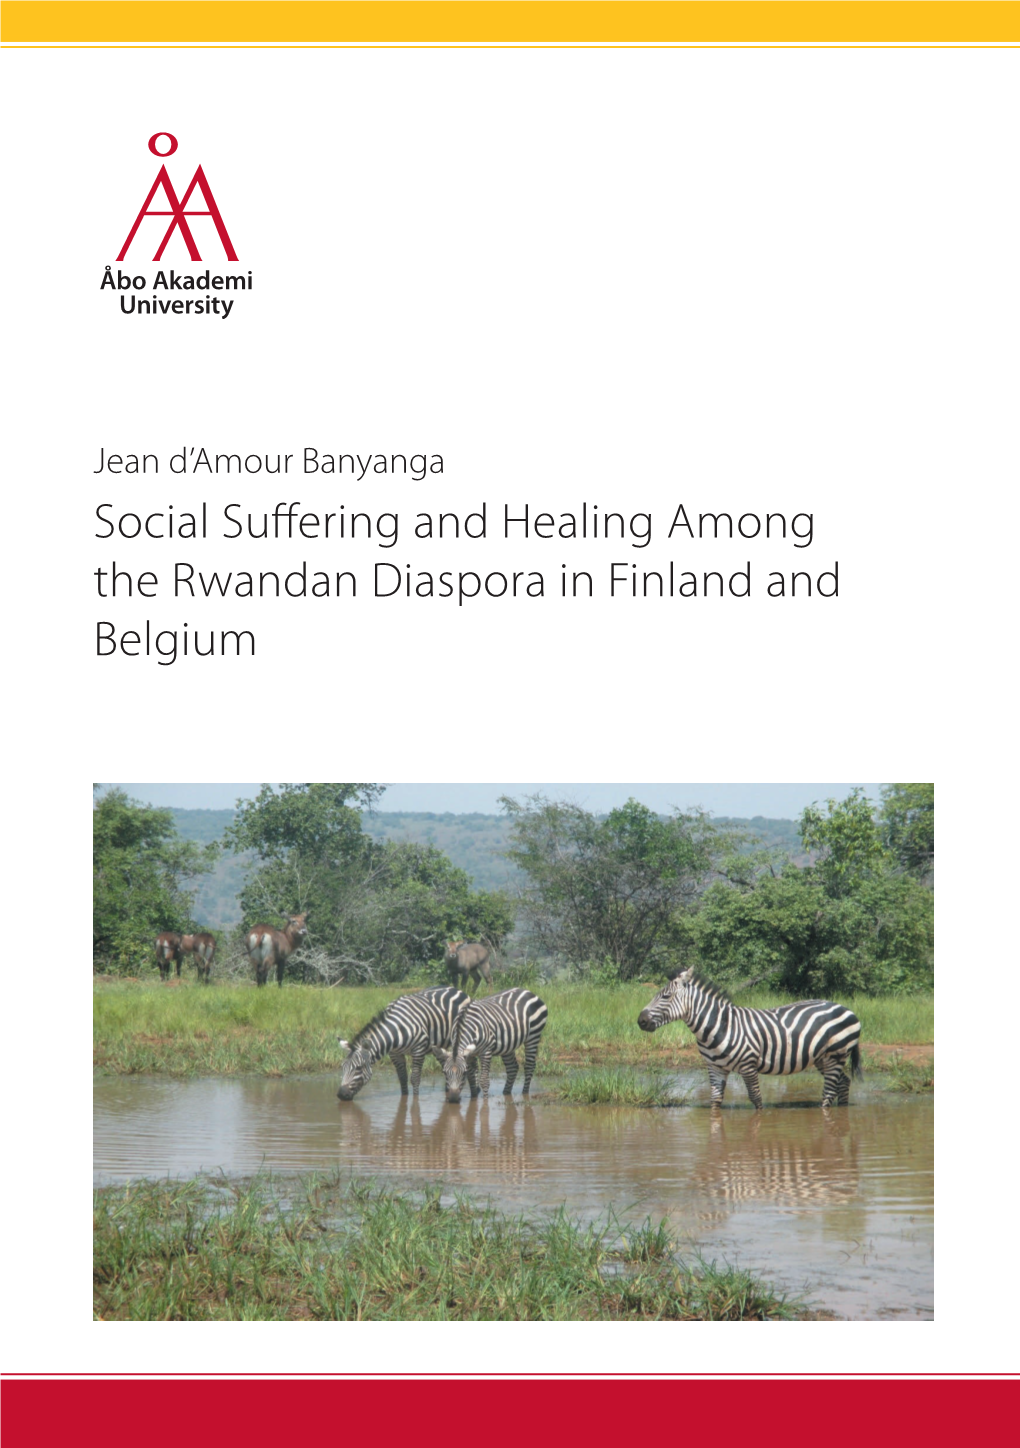 Jean D'amour Banyanga: Social Suffering and Healing Among The